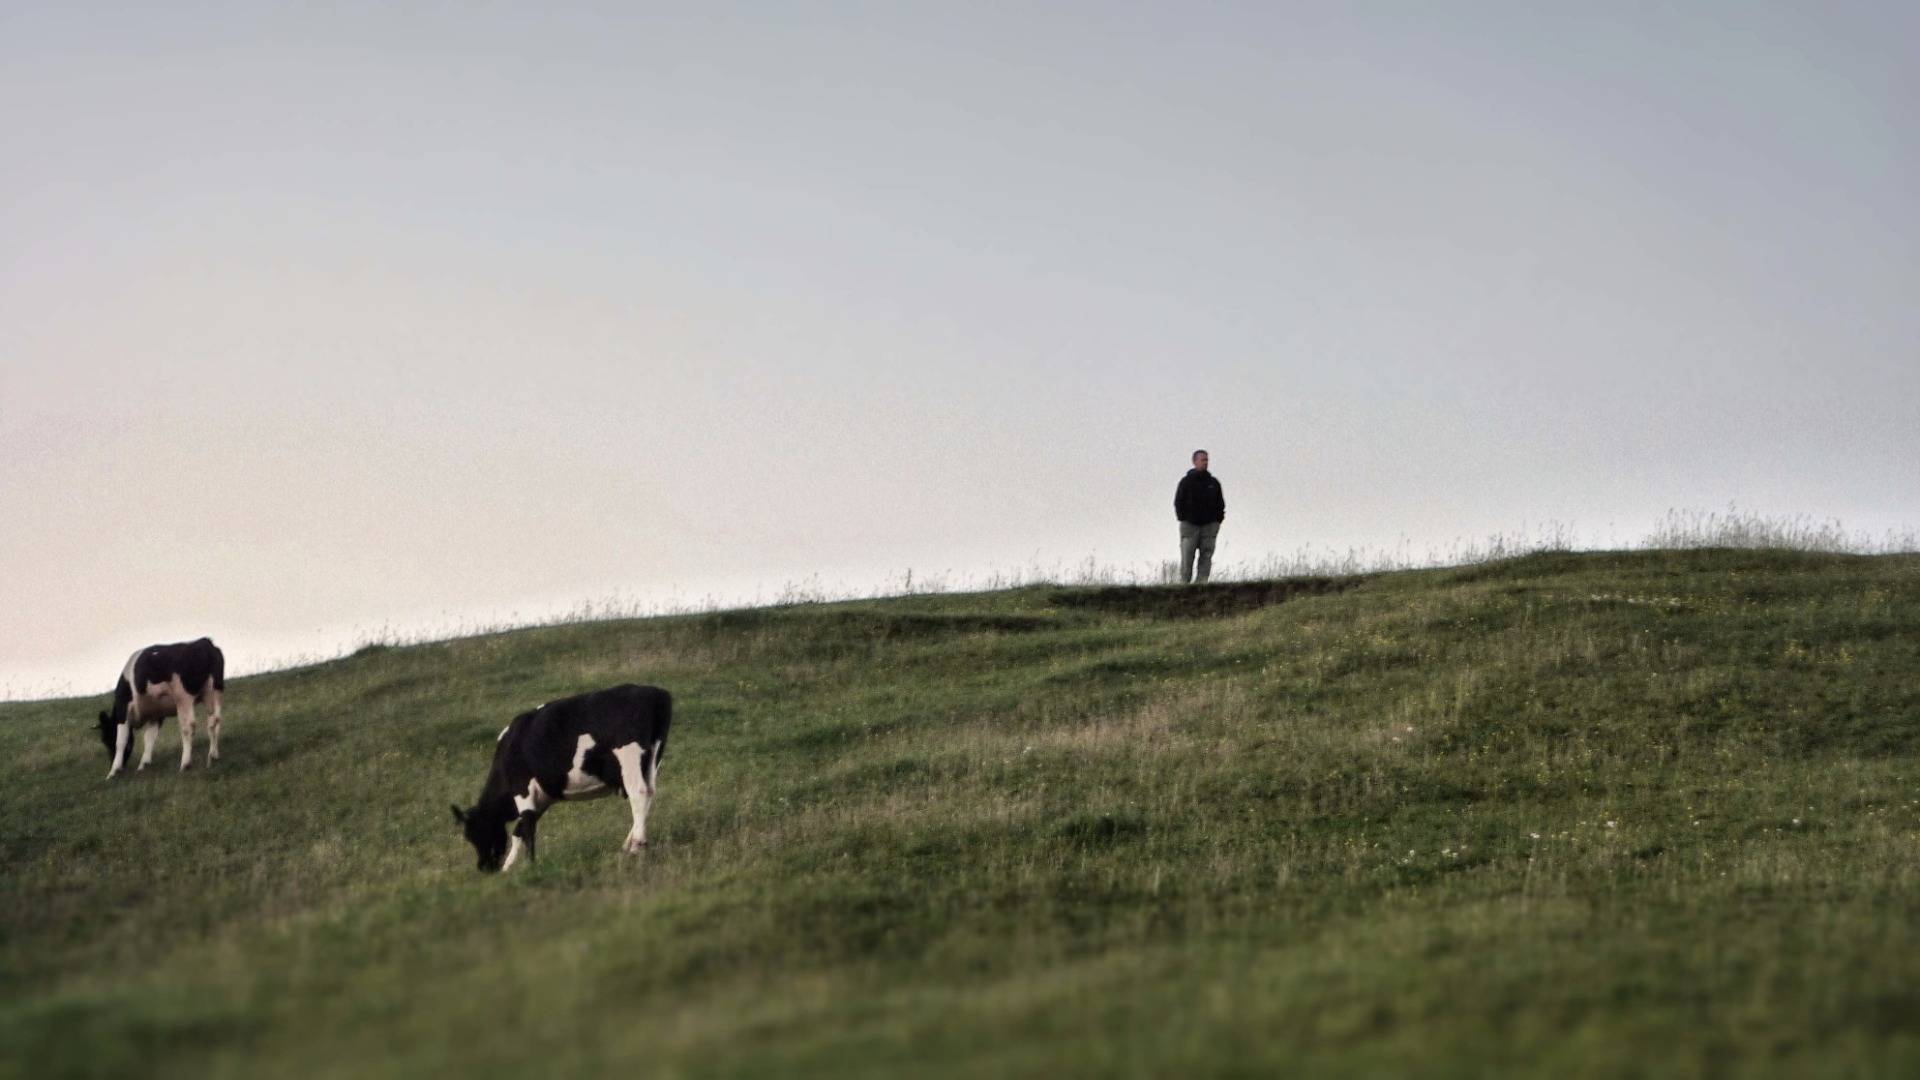 Me at a hill with cows